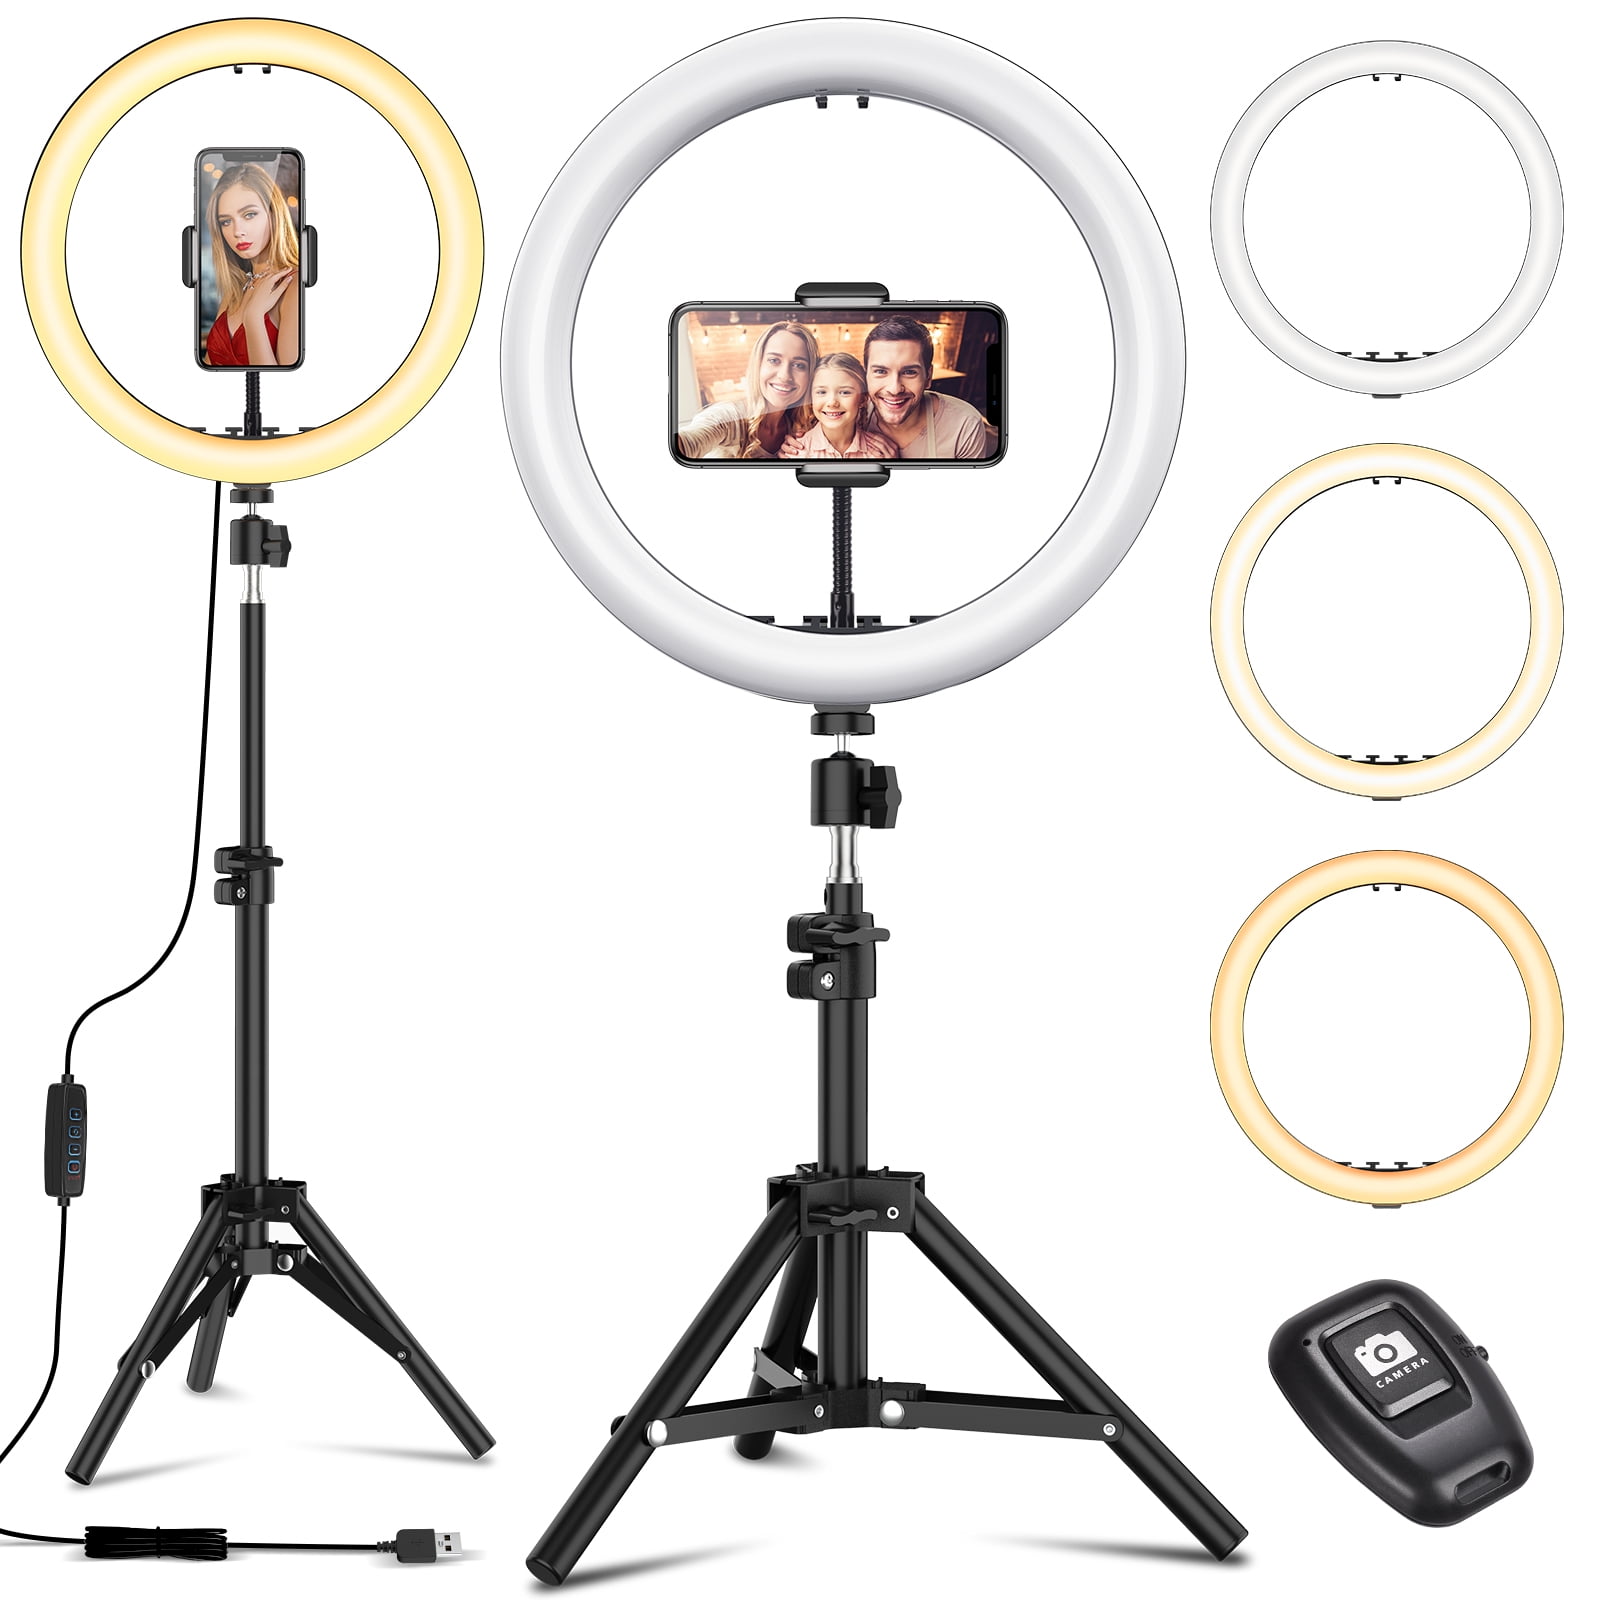 10 Selfie Ring Light with Tripod Stand for Camera/iPhone/Android 60 Extendable Tripod with Led Ring Light 2 Phone Holders Dimmable Circle Laptop Light for Makeup/Streaming/YouTube/Titok/Video/Live 